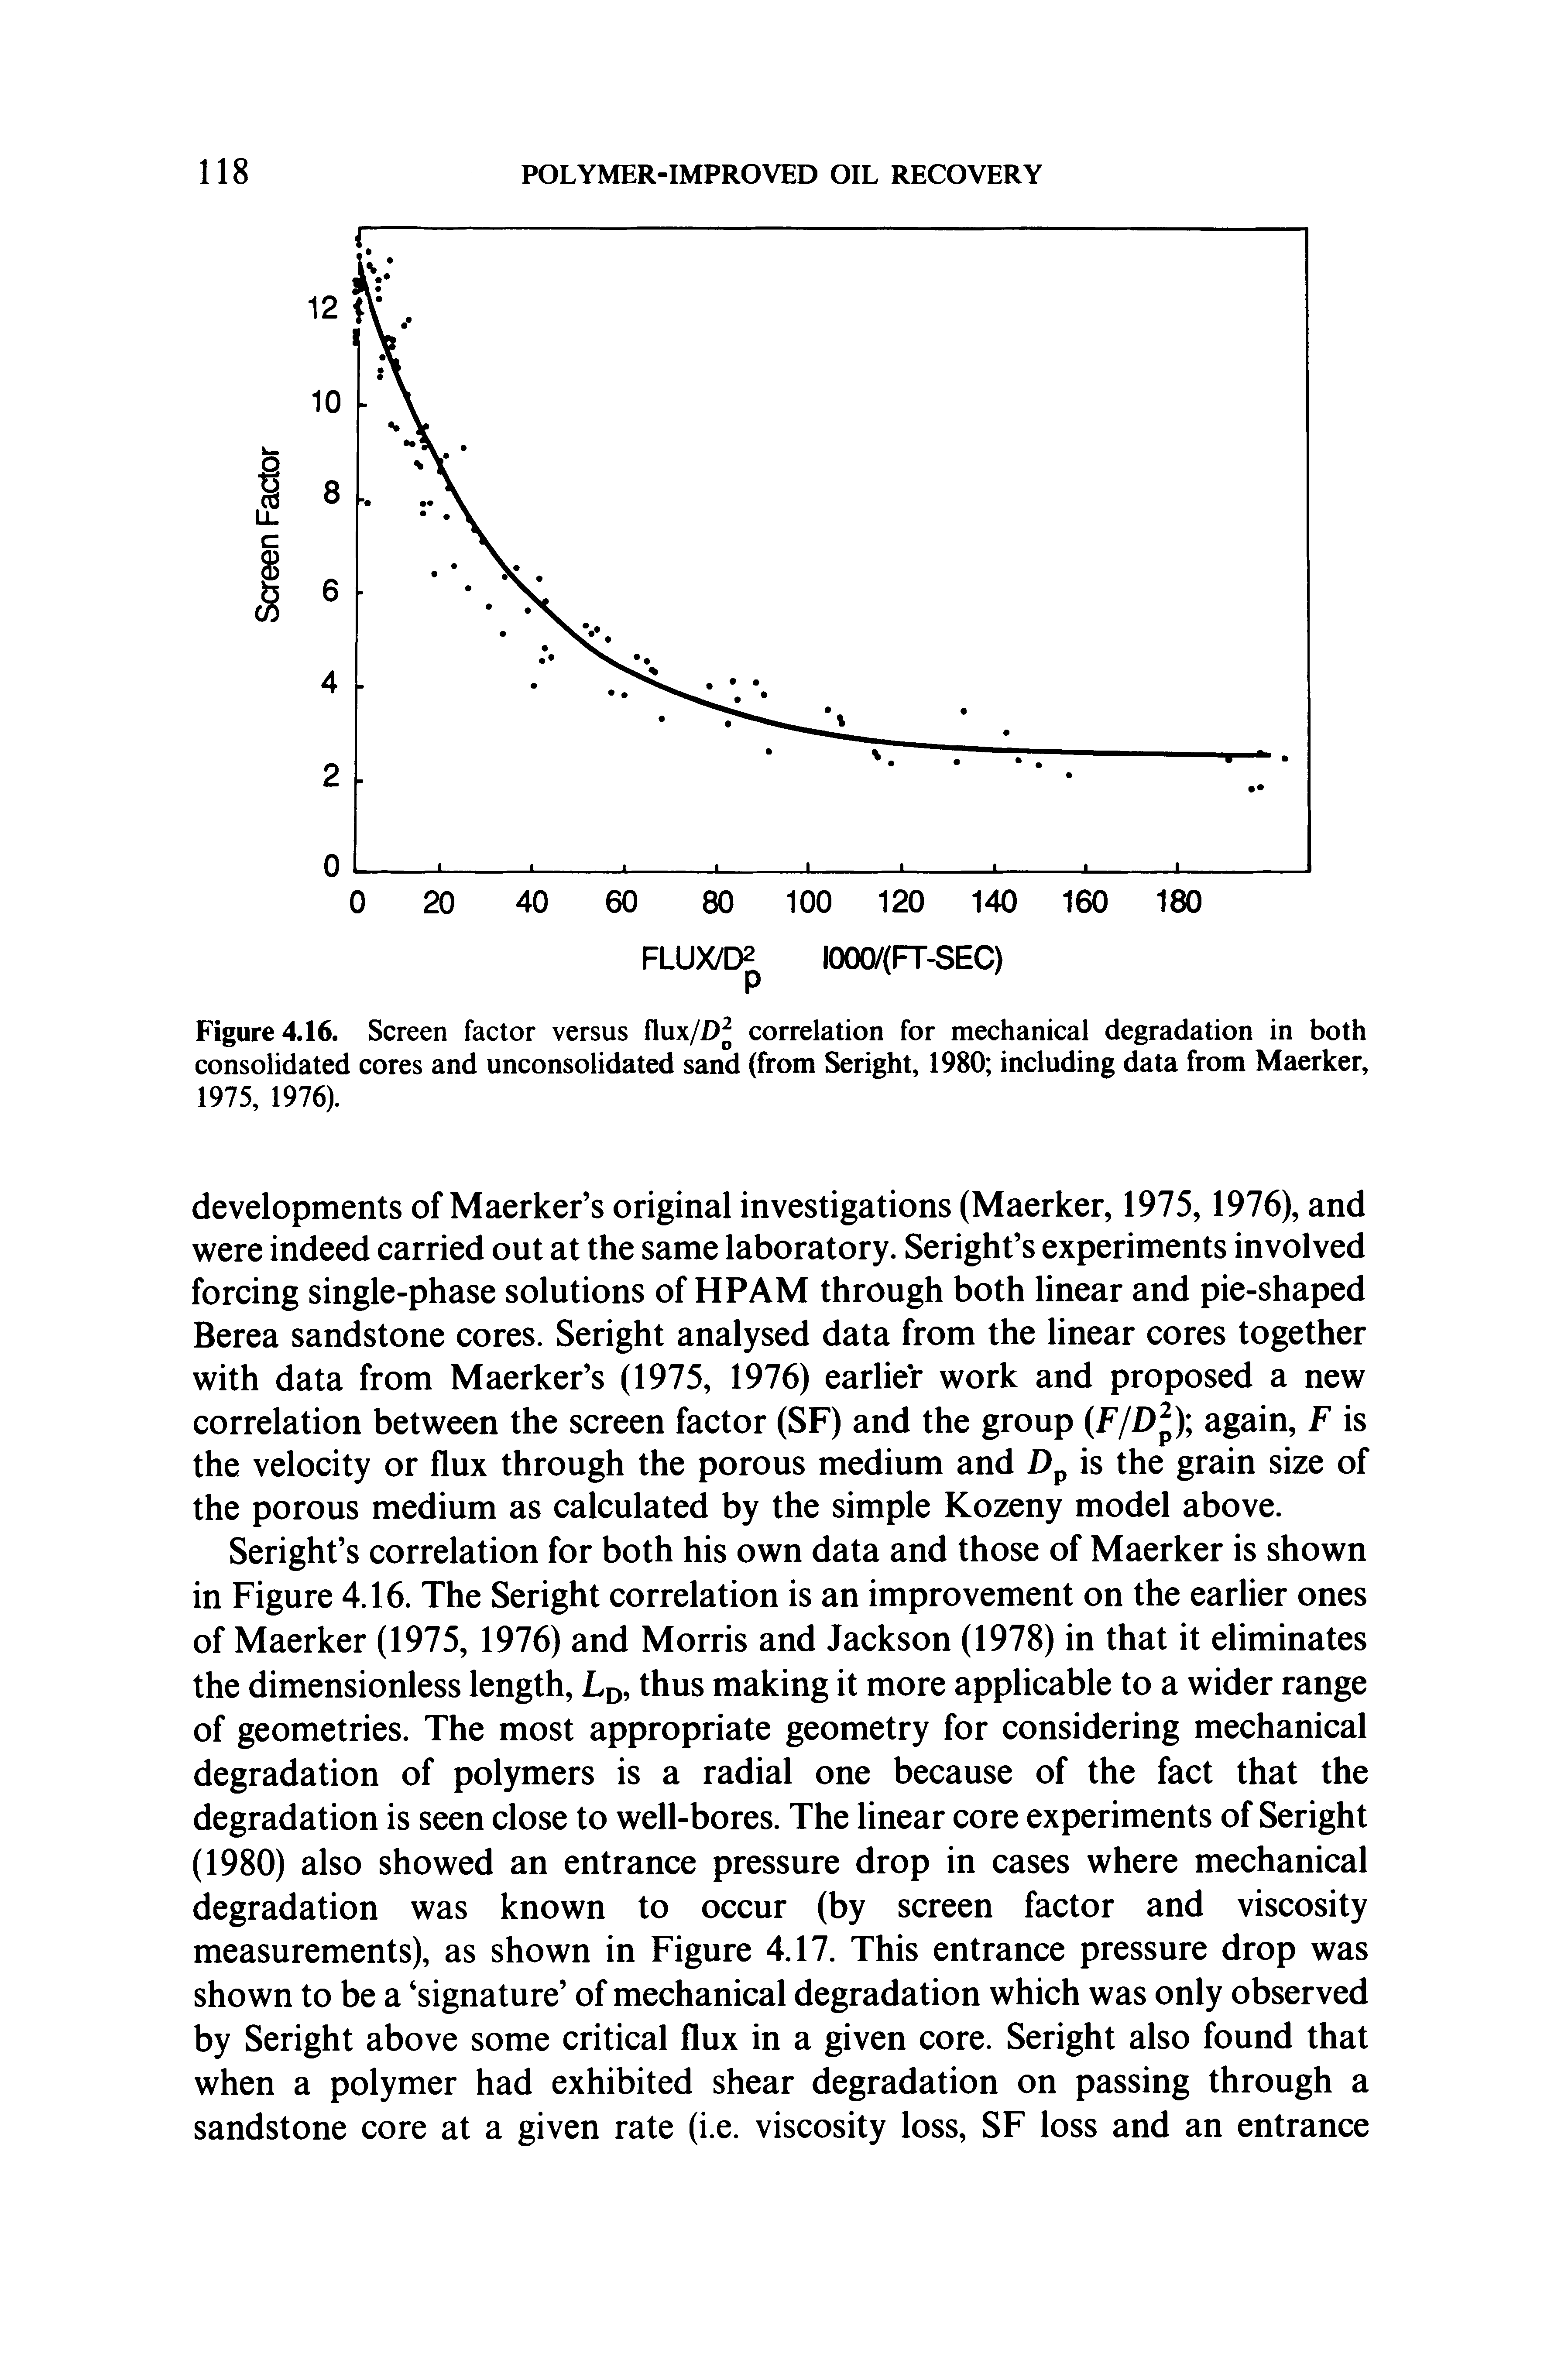 Figure 4.16. Screen factor versus flux/D correlation for mechanical degradation in both consolidated cores and unconsolidated sand (from Seright, 1980 including data from Maerker, 1975, 1976).